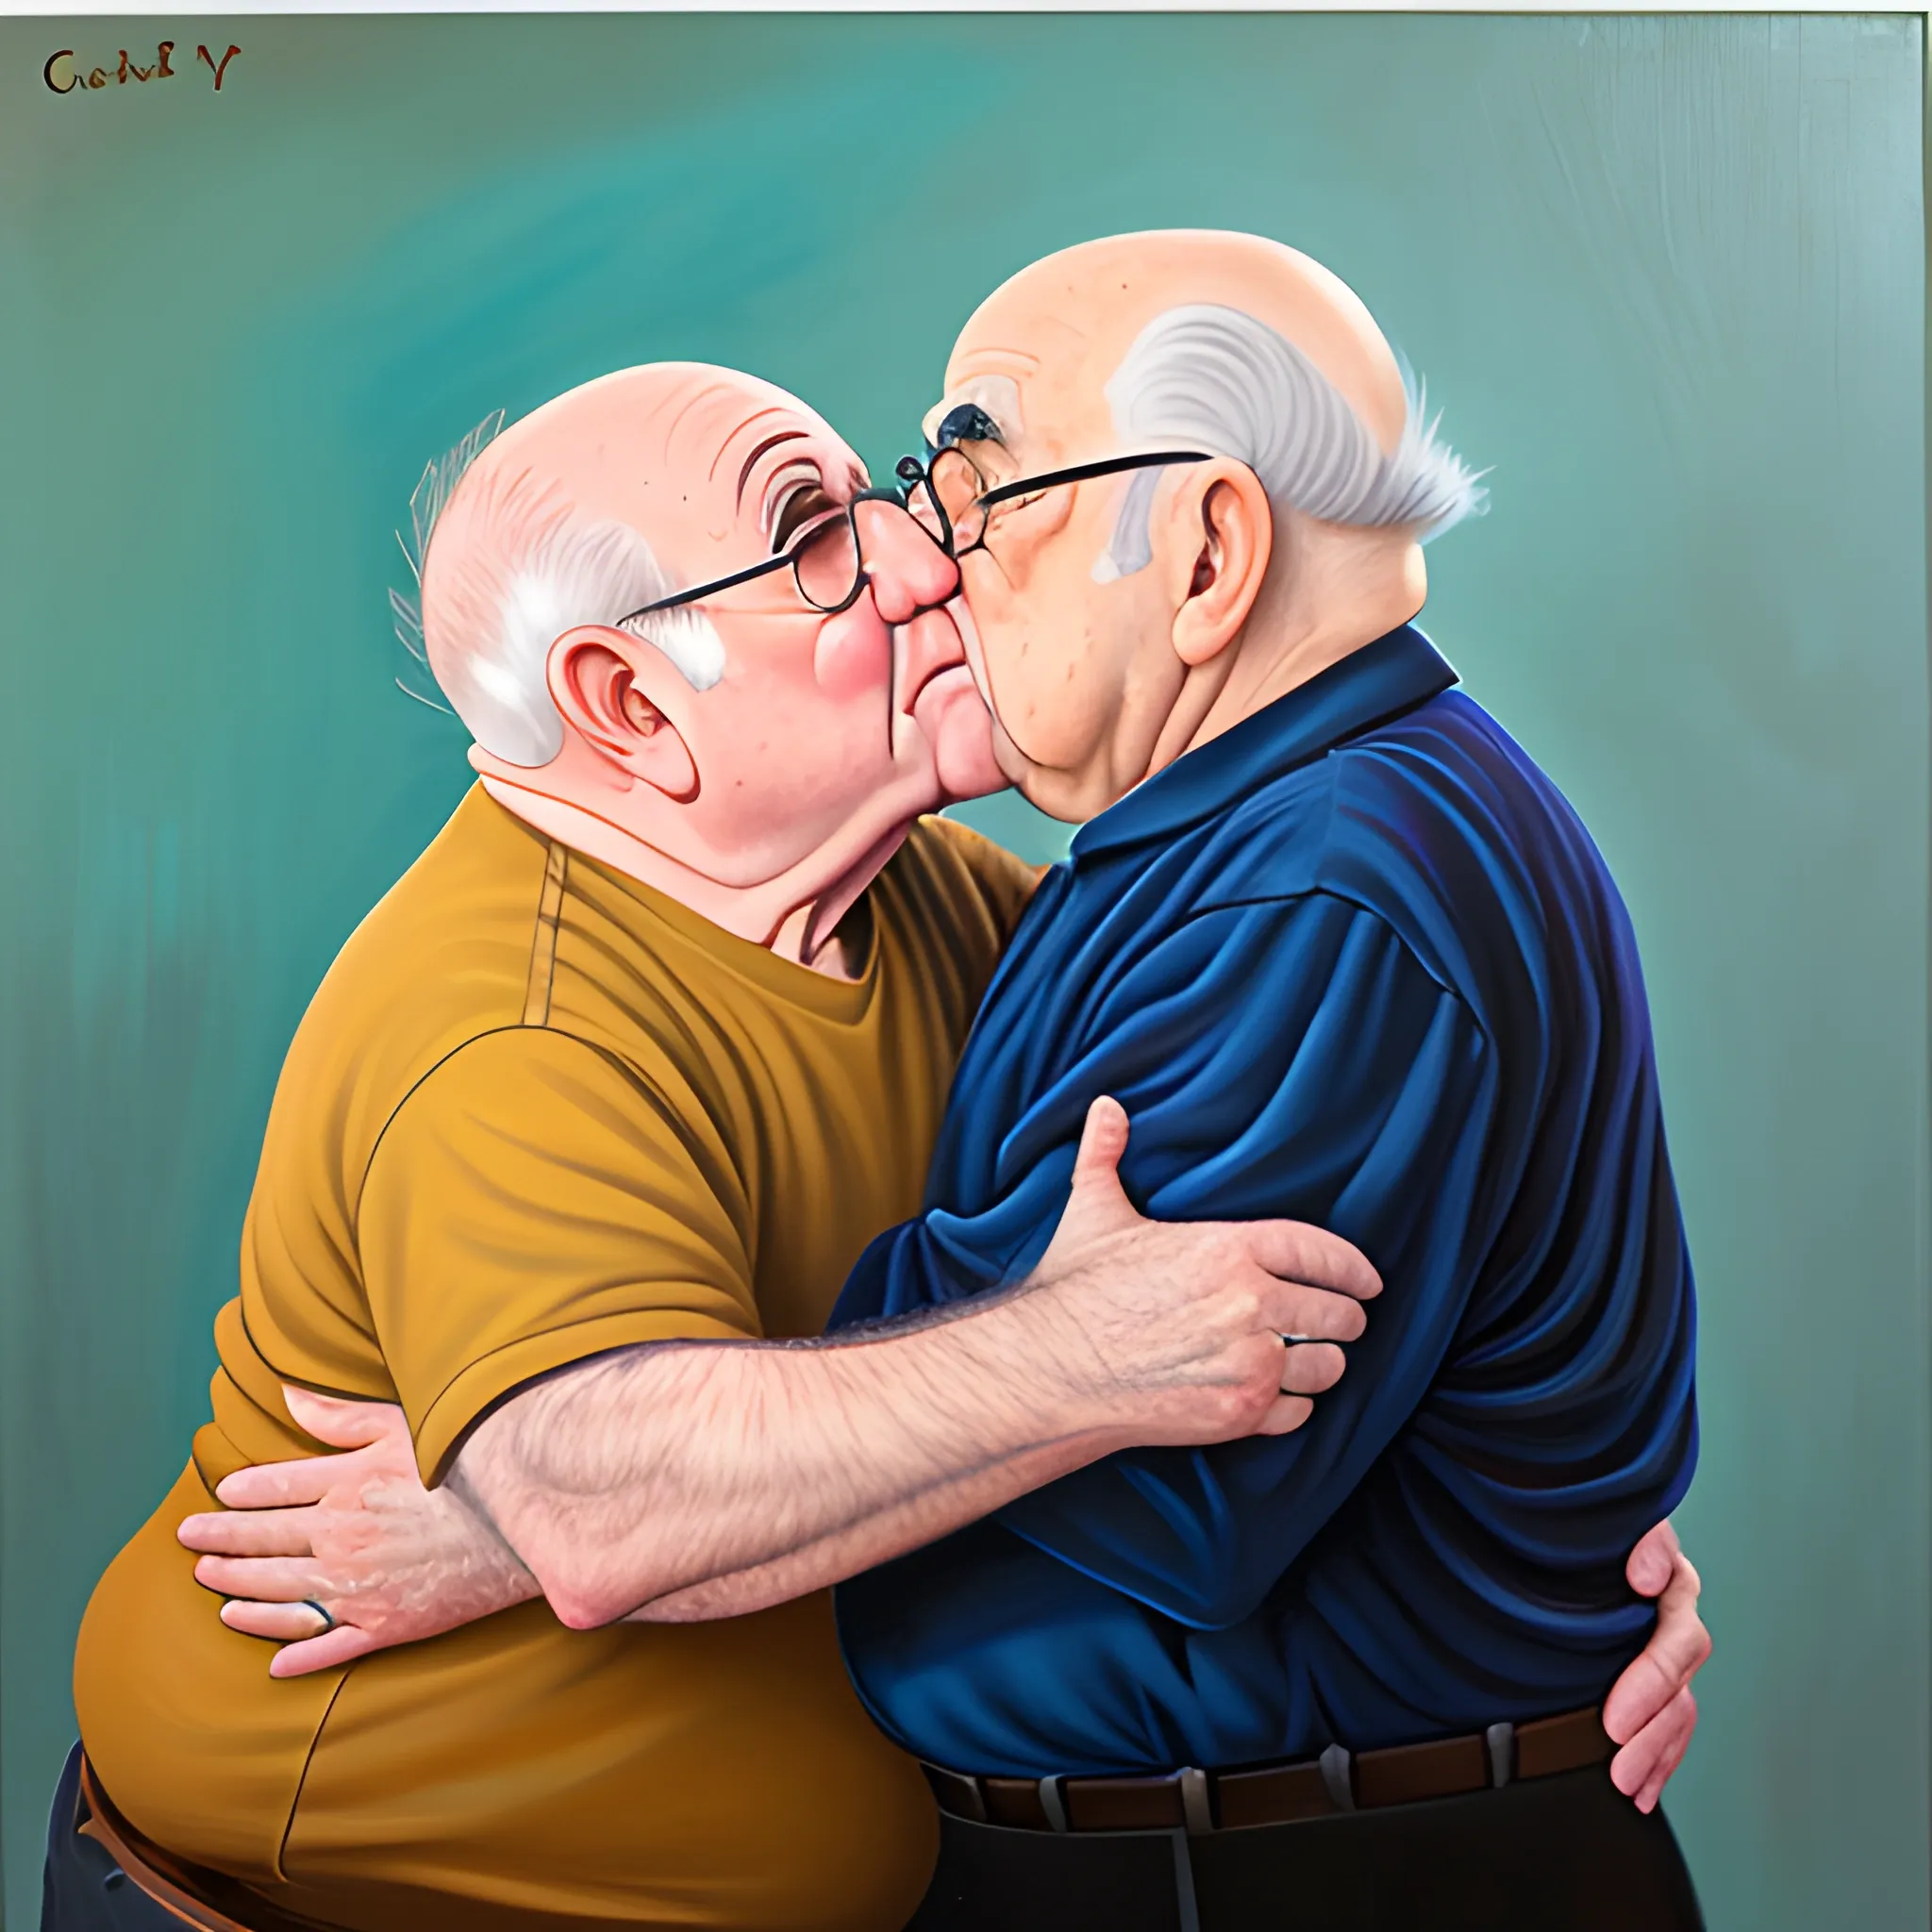 Ed Asner, chubby, kissing, Oil Painting